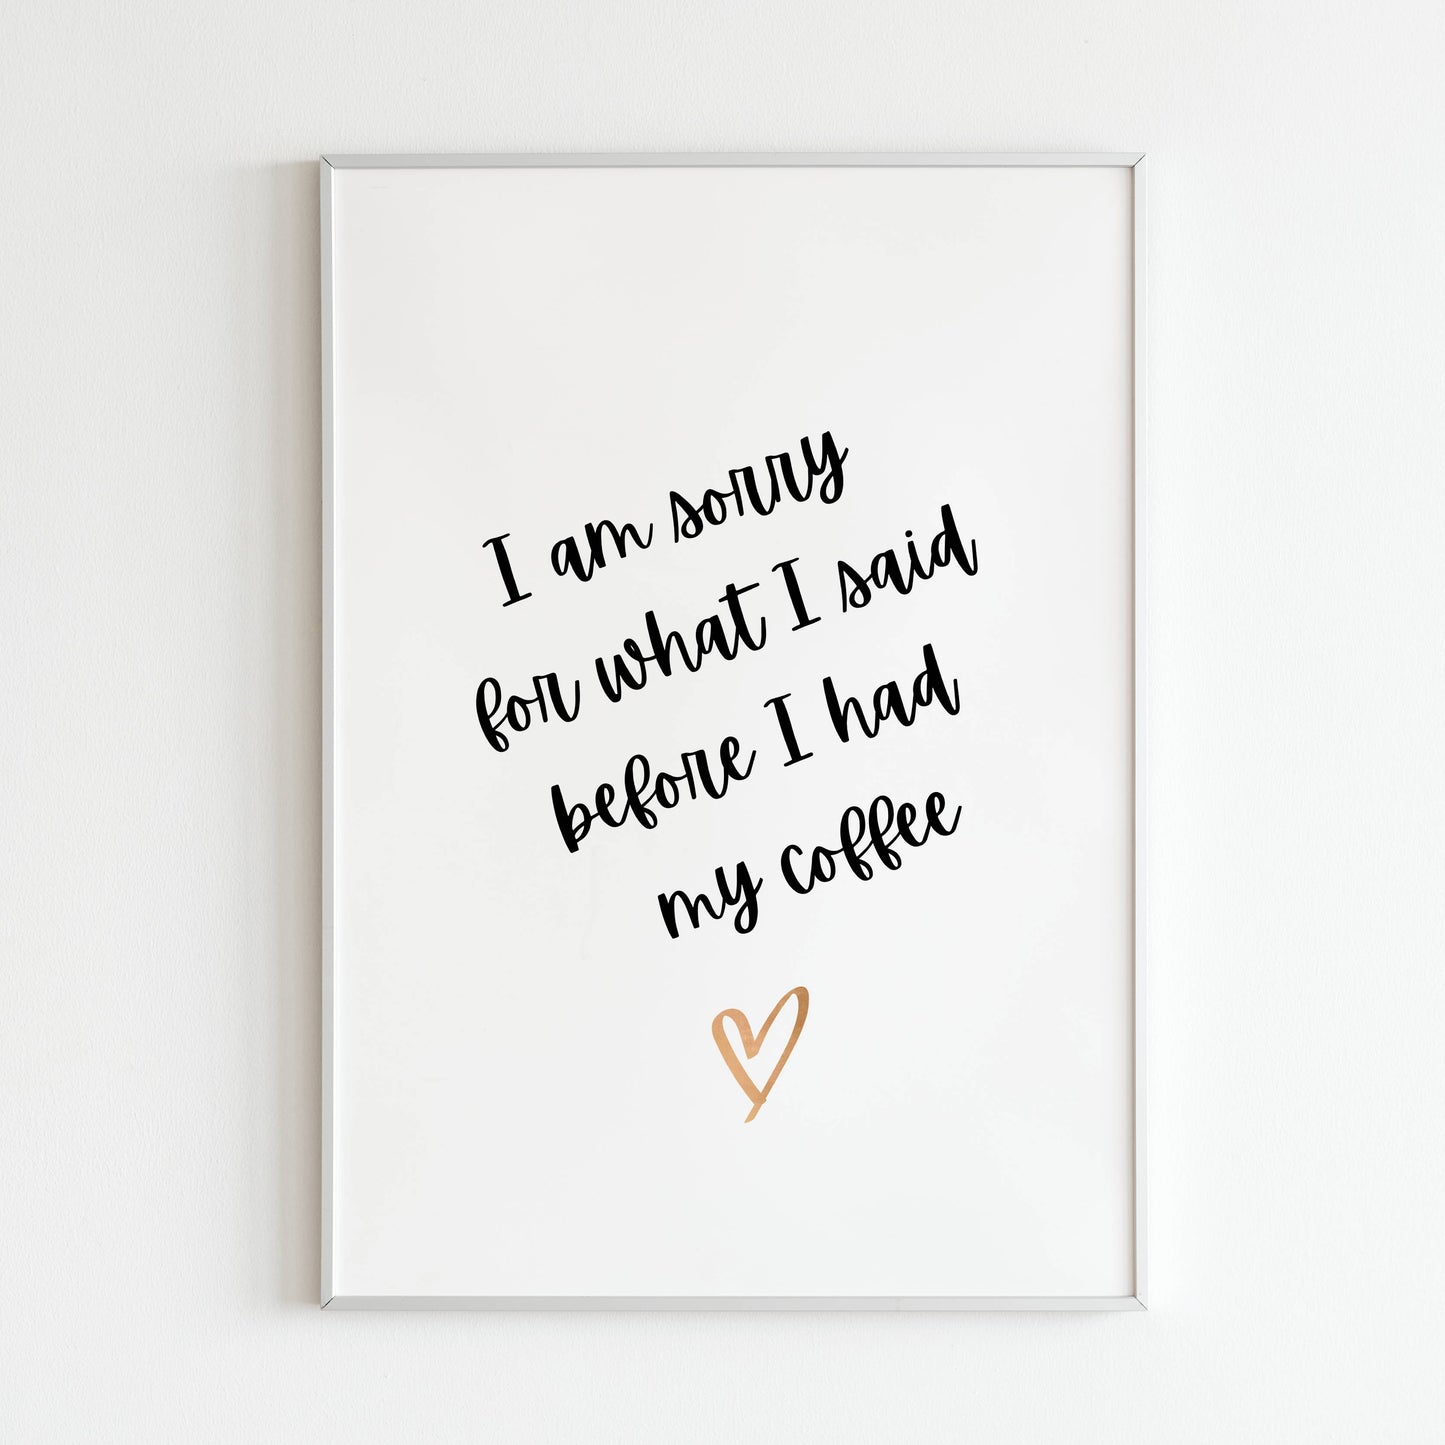 Downloadable "I am sorry for what I said before I had my coffee" art print, add a touch of humor while acknowledging your grumpy mornings.